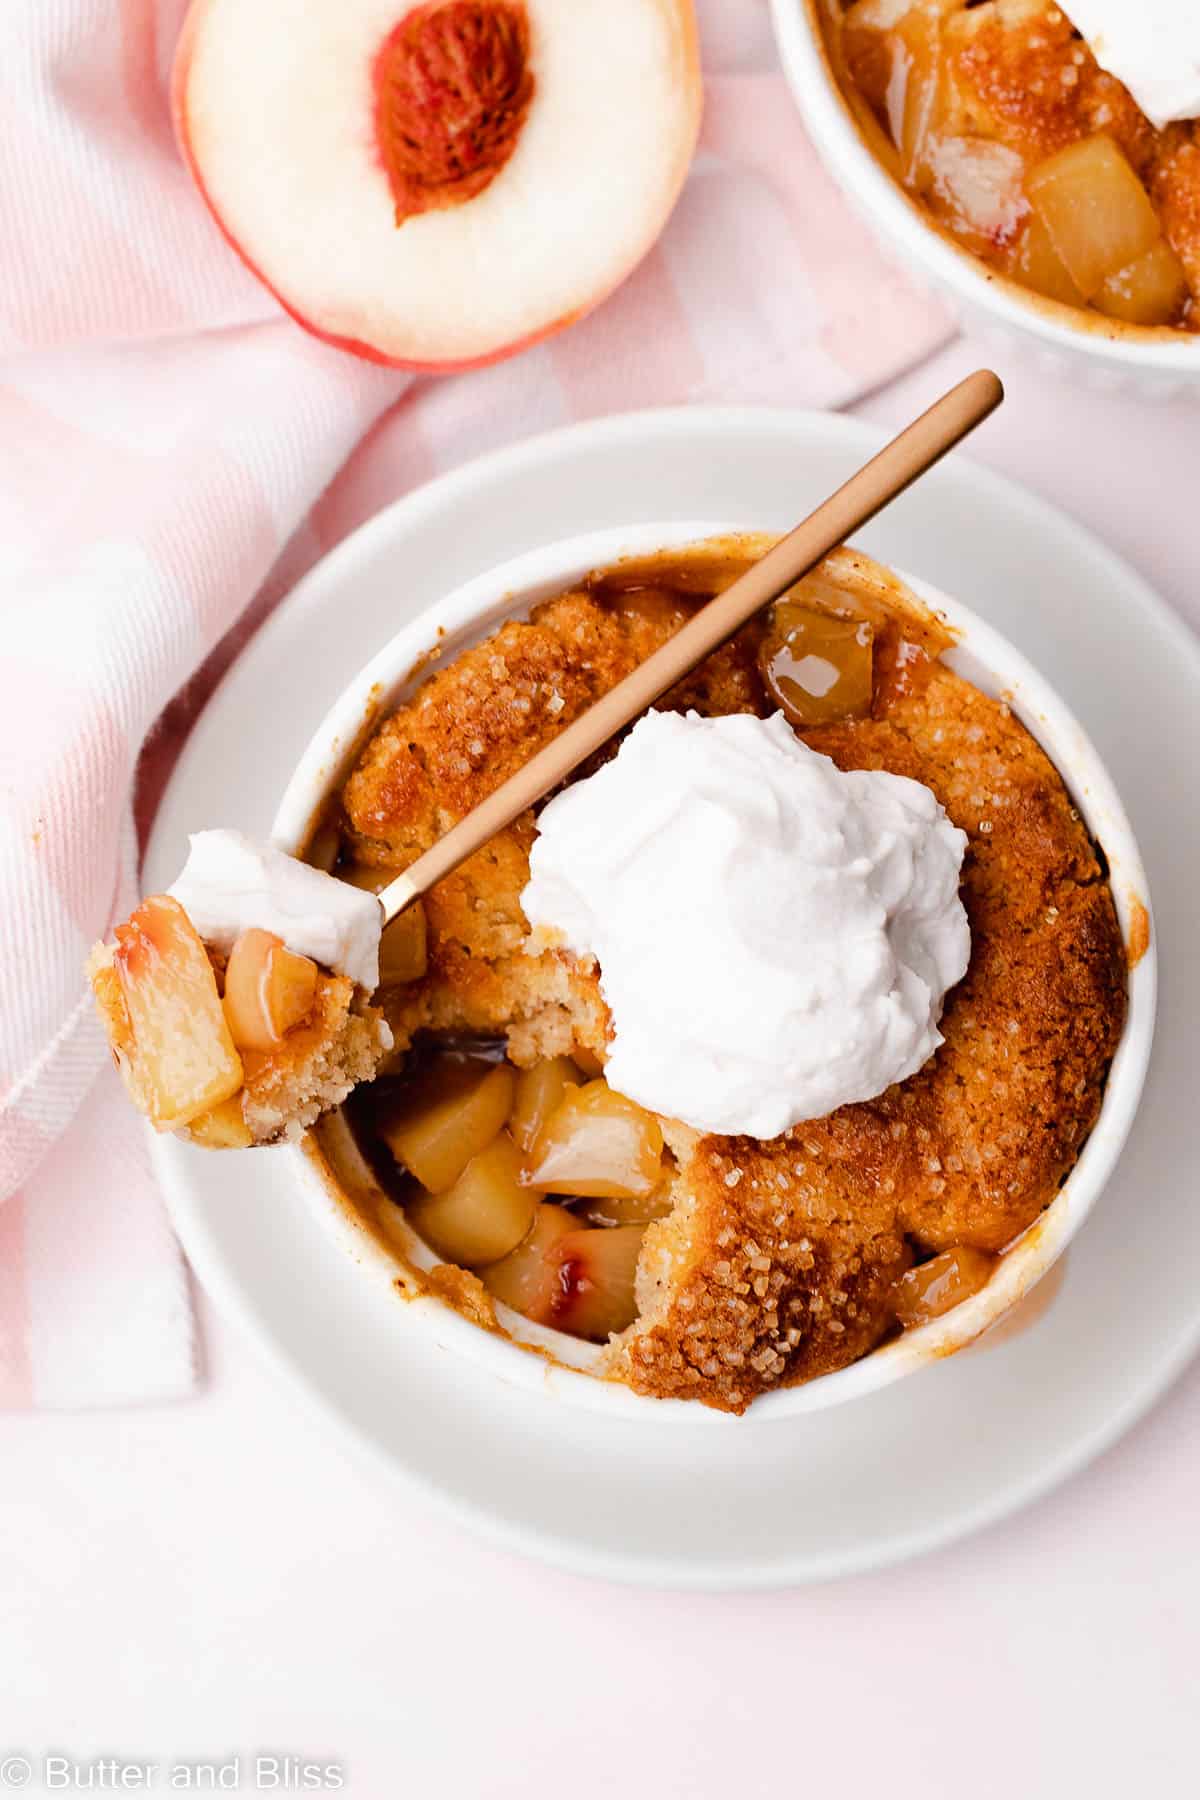 Top view of end of summer juicy peach cobbler topped with whipped cream on a spoon